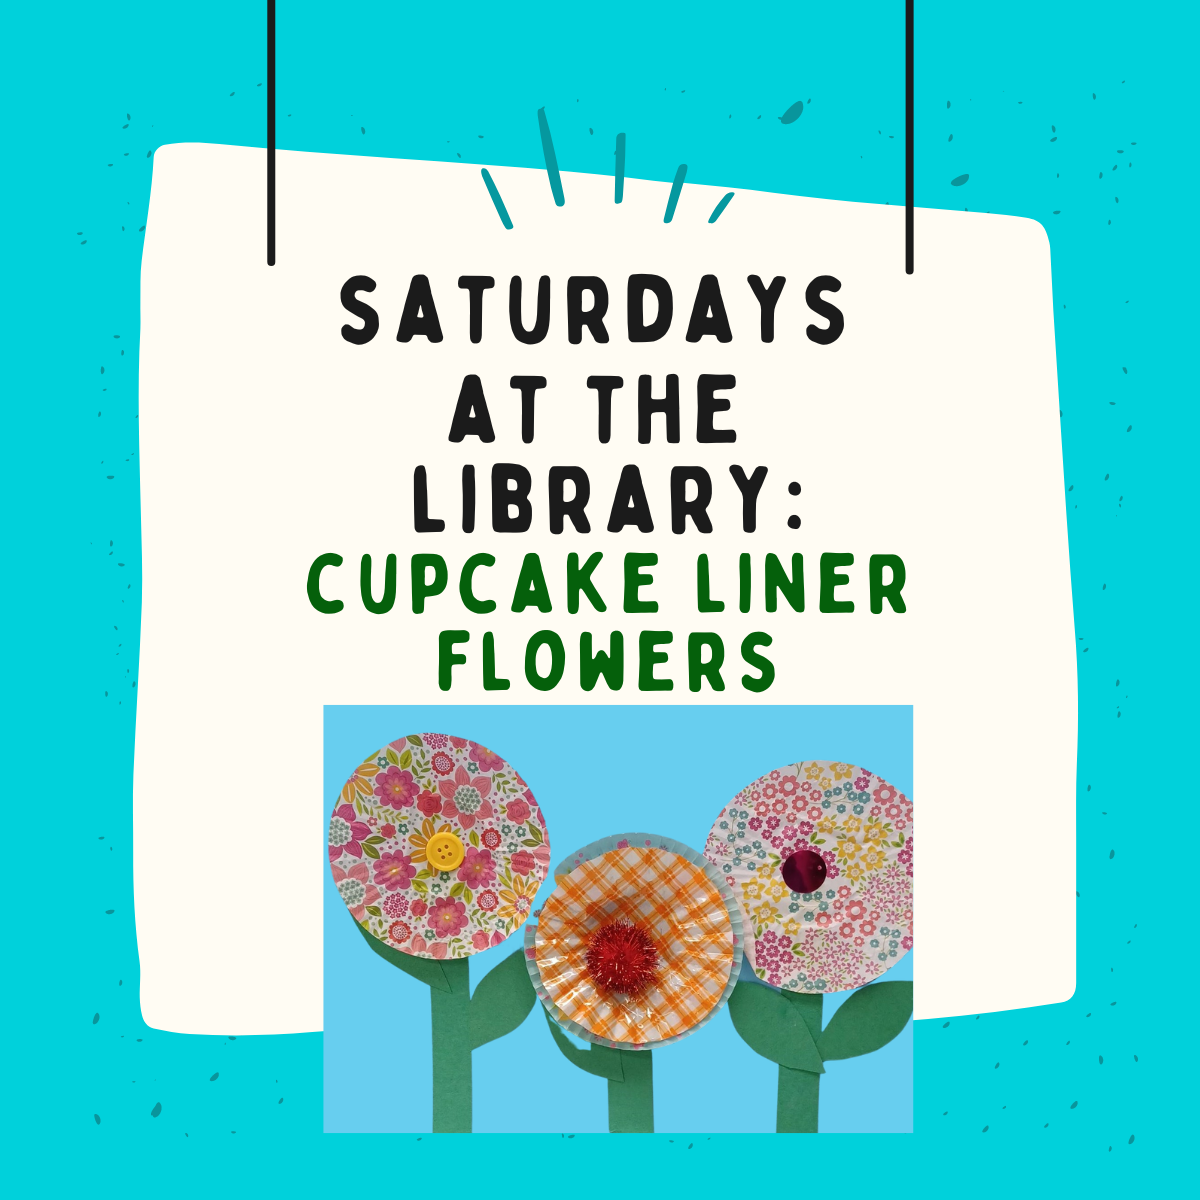 light blue background with white square in the middle, text in black says saturdays at the library, text in green says cupcake liner flowers. image on bottom of flyer is 3 cupcake liner flowers on a blue background.